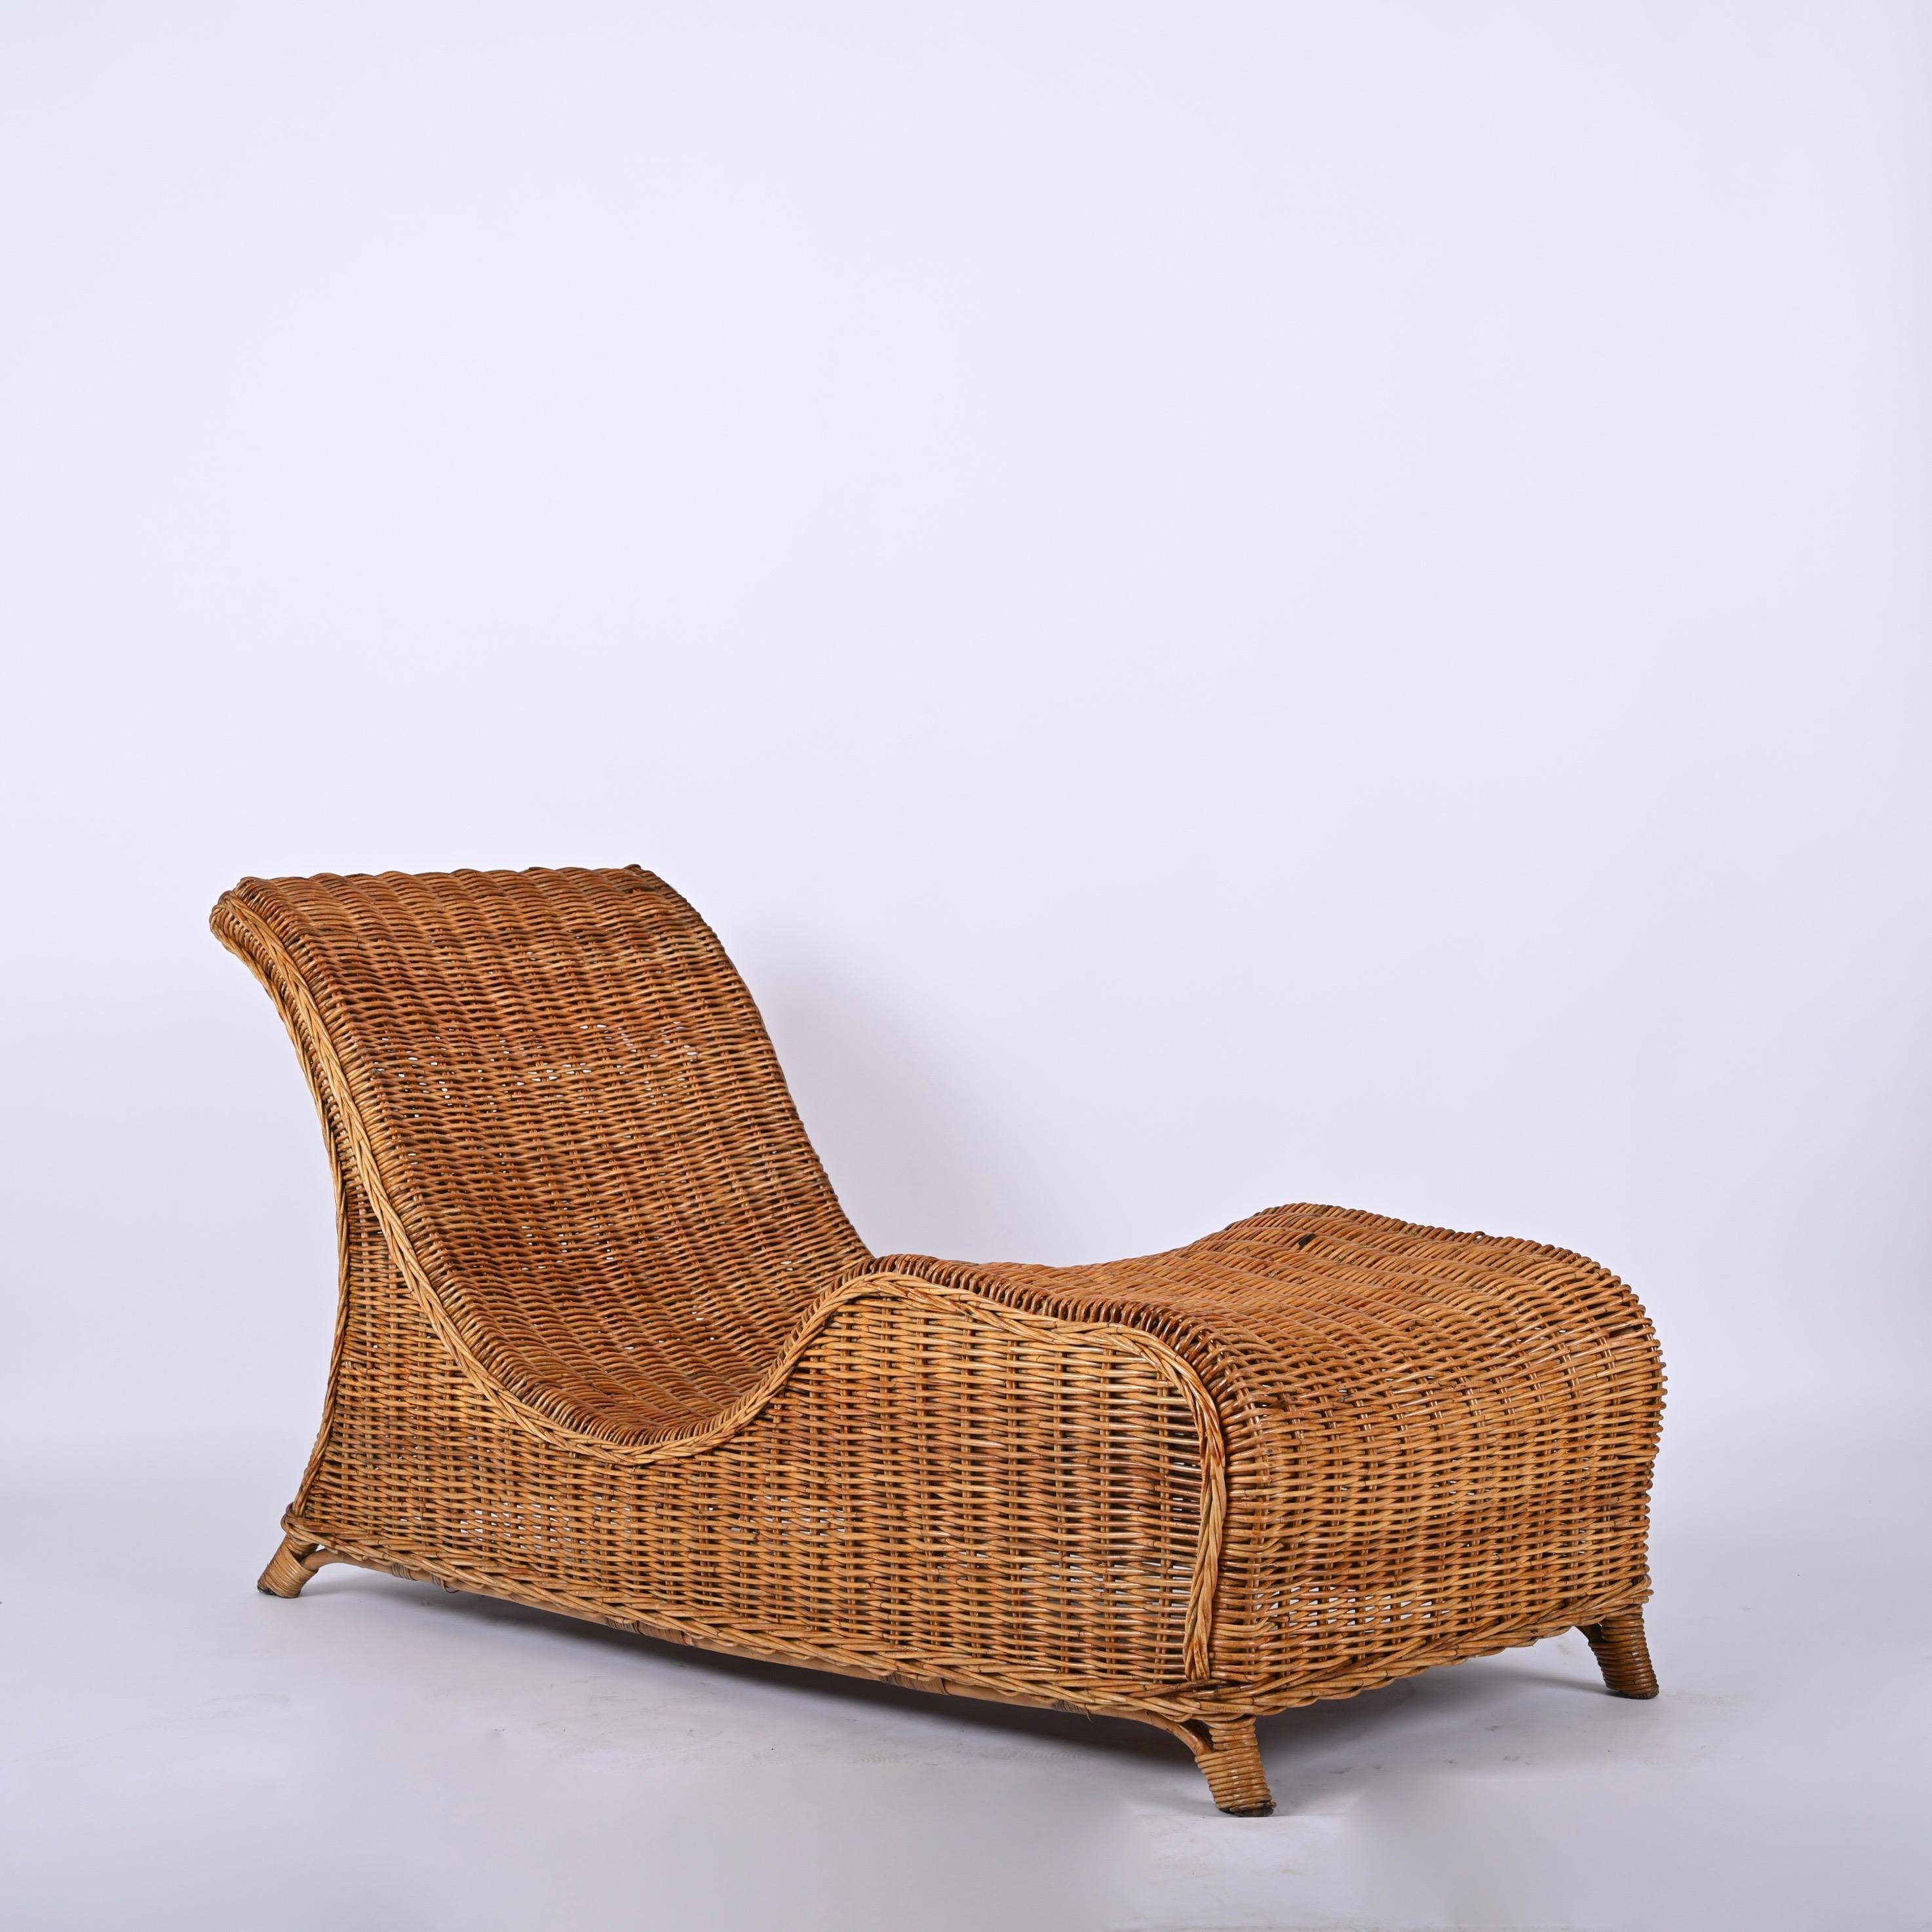 20th Century Midcentury Modern Bamboo and Wicker Italian Chaise Longue, 1960s For Sale